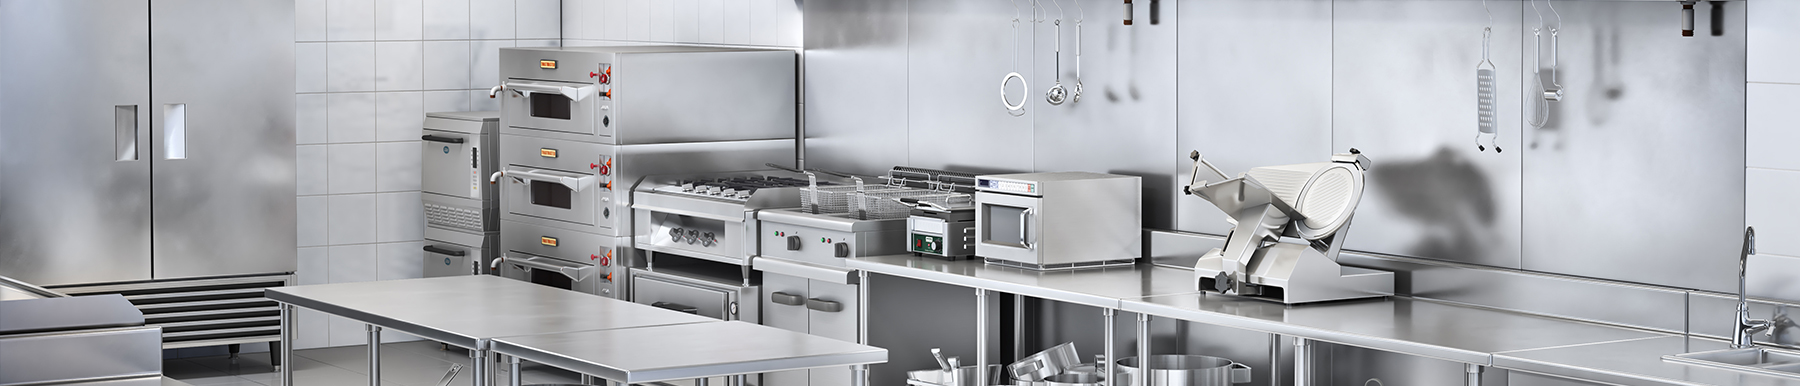 Catering Equipment Suppliers Near Bournemouth | H2 Catering Equipment Catering Equipment